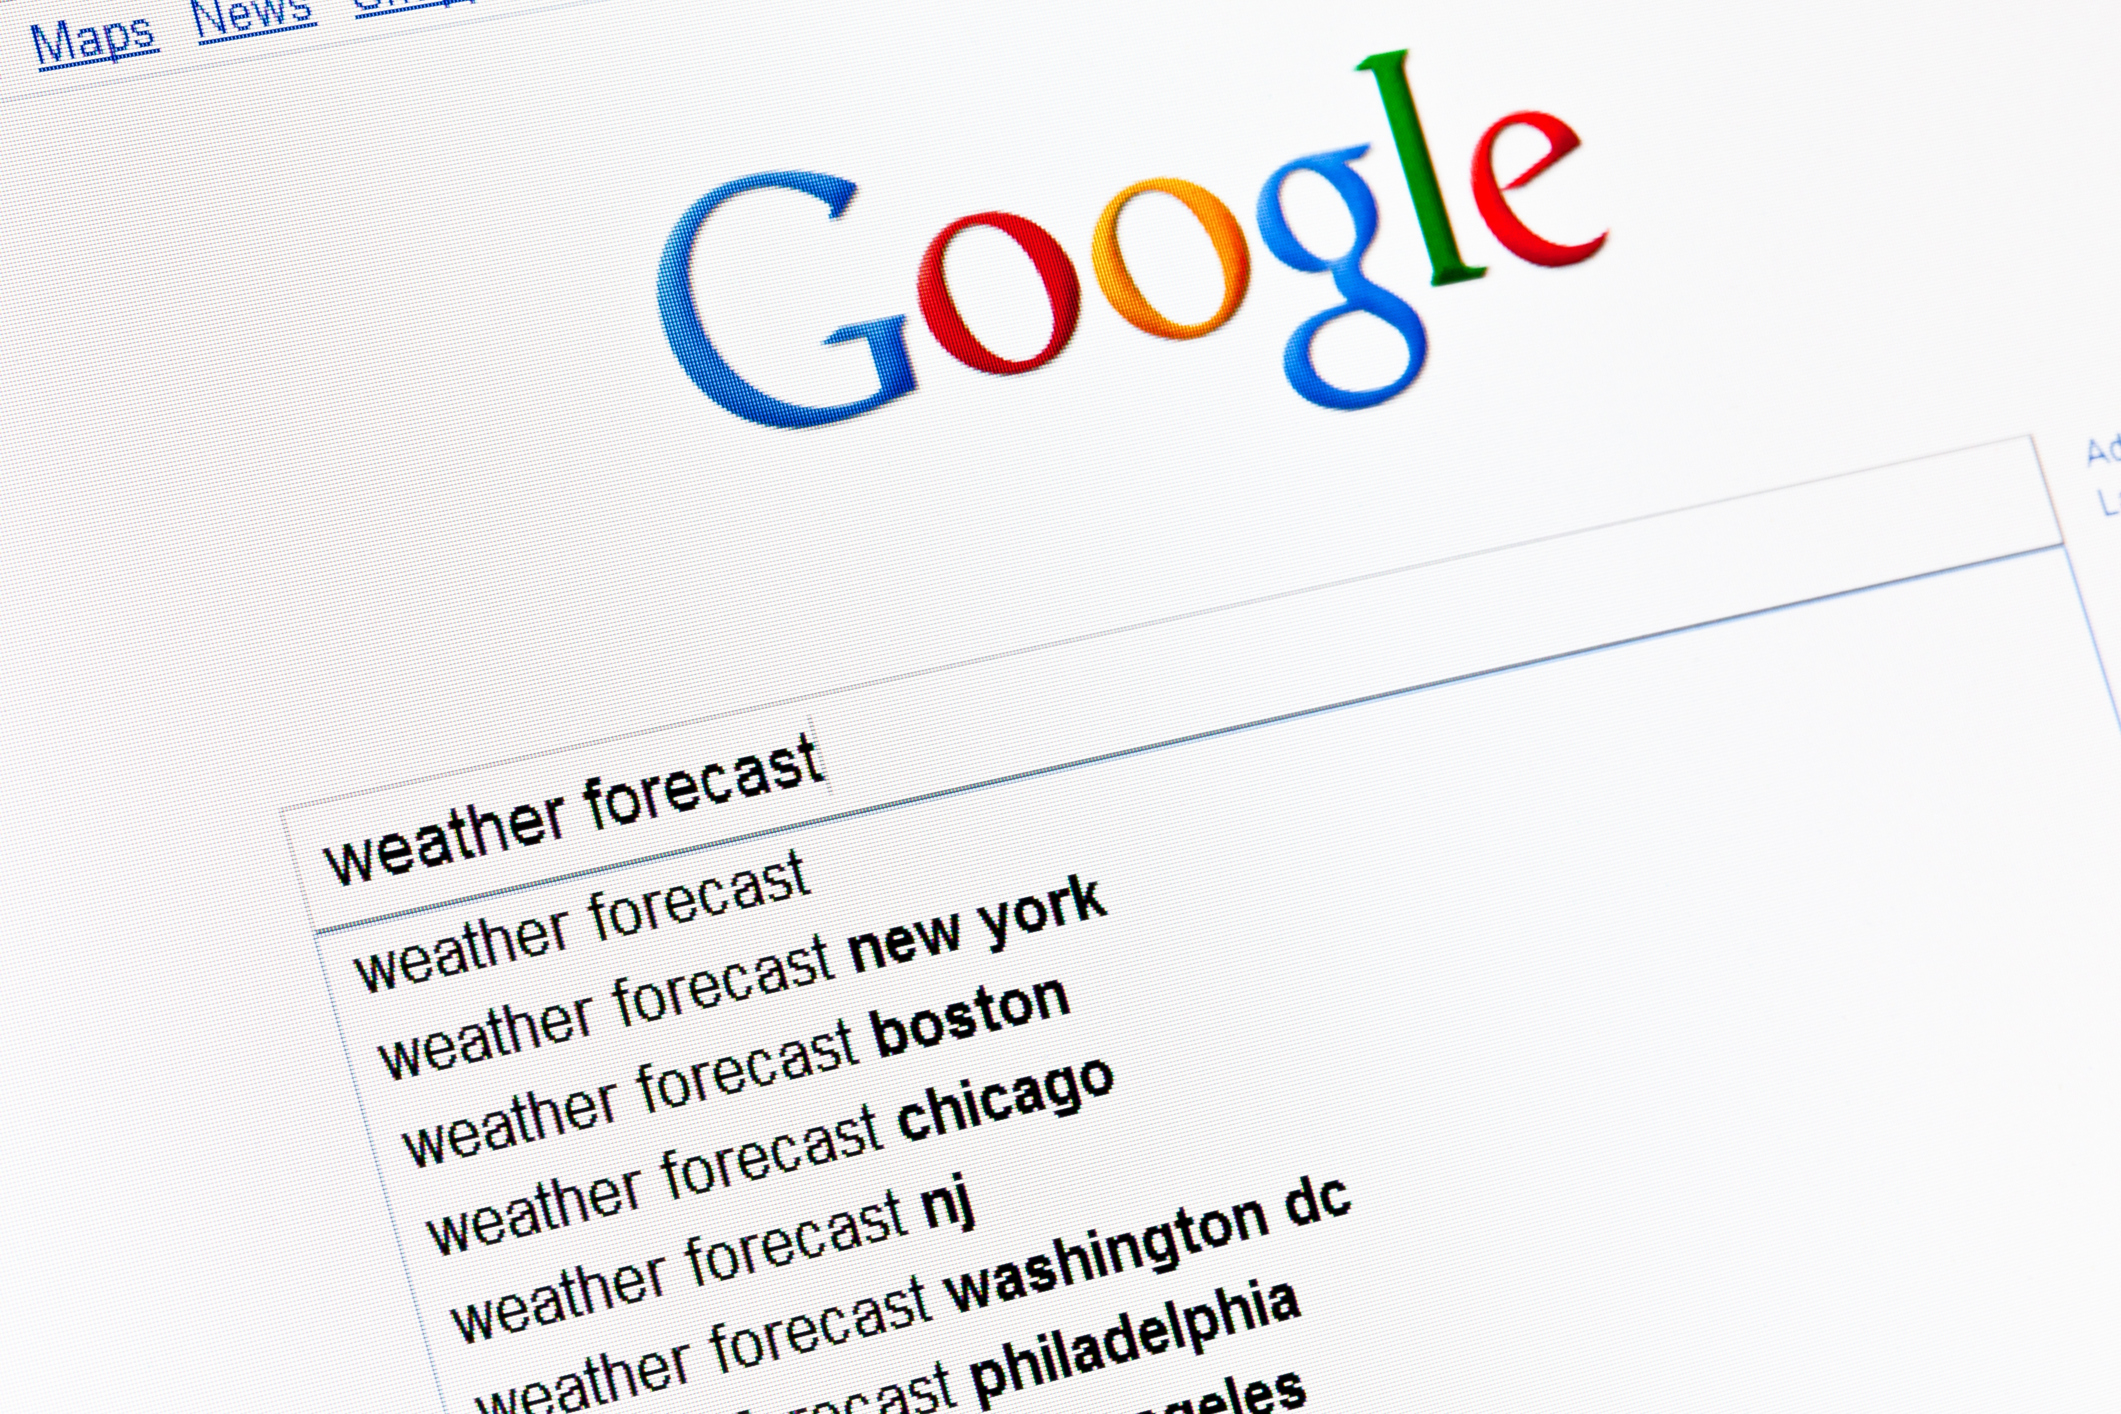 Searching for weather forecasts on Google in the English language